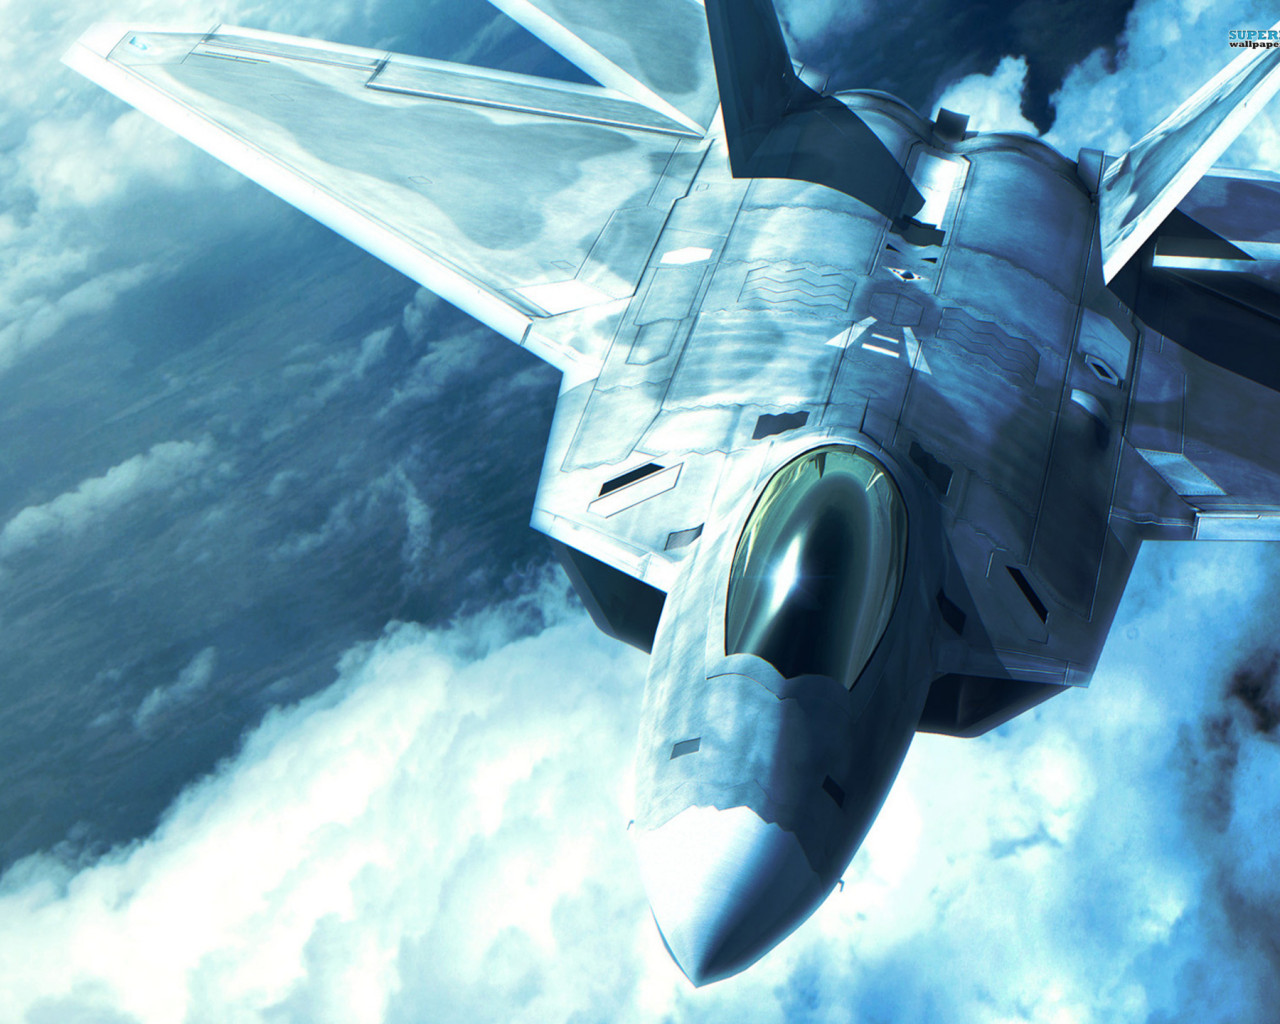 Ace of Combat X: Skies of Deception